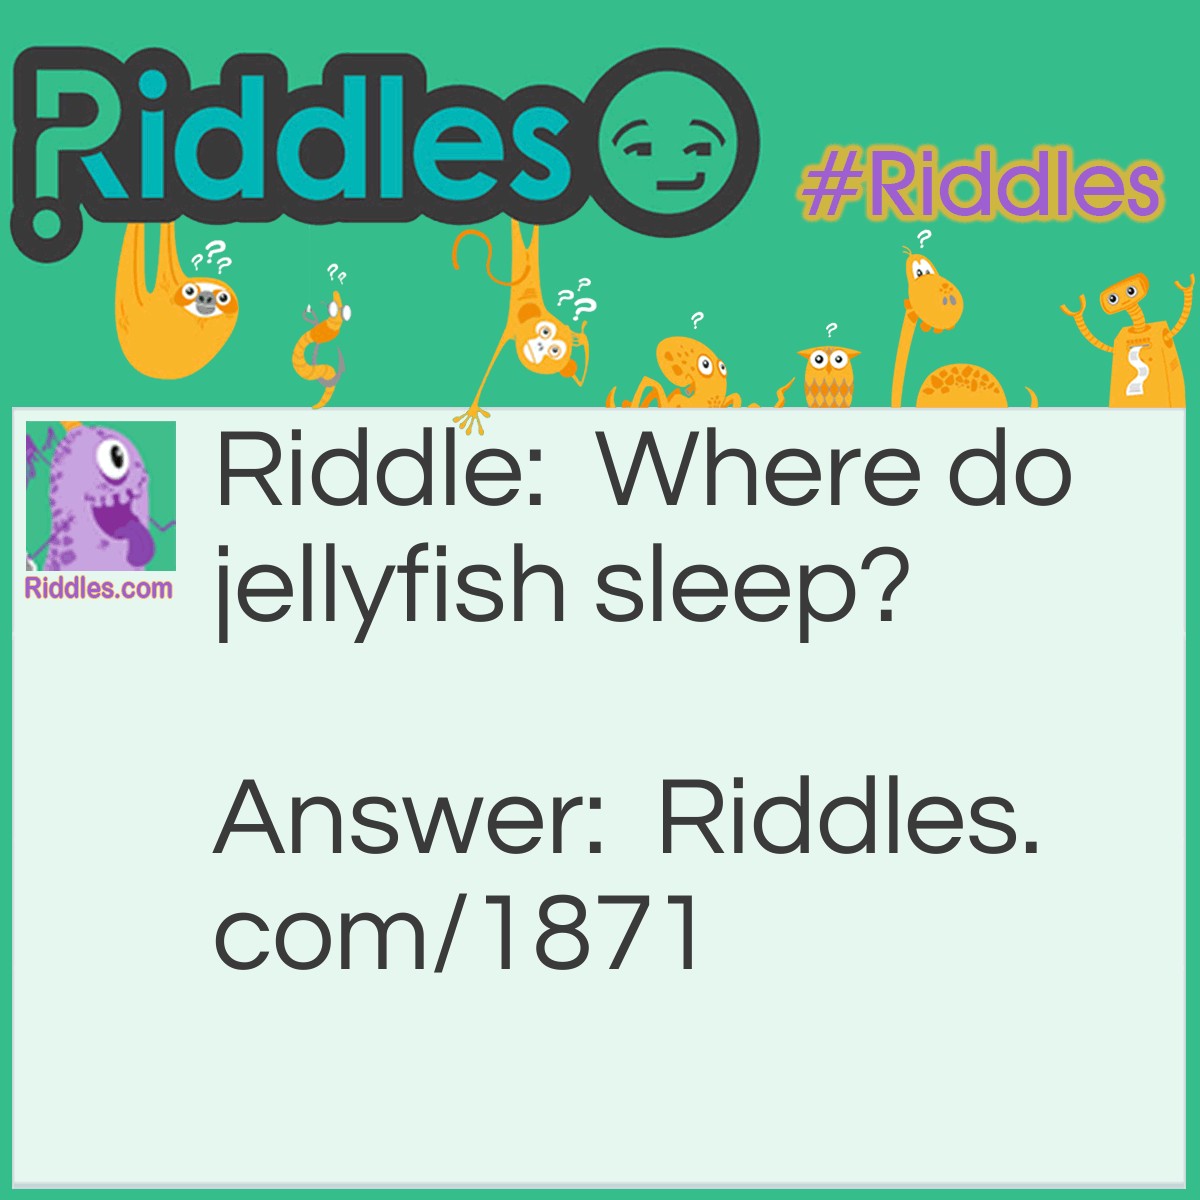 Riddle: Where do jellyfish sleep? Answer: In tent-acles.